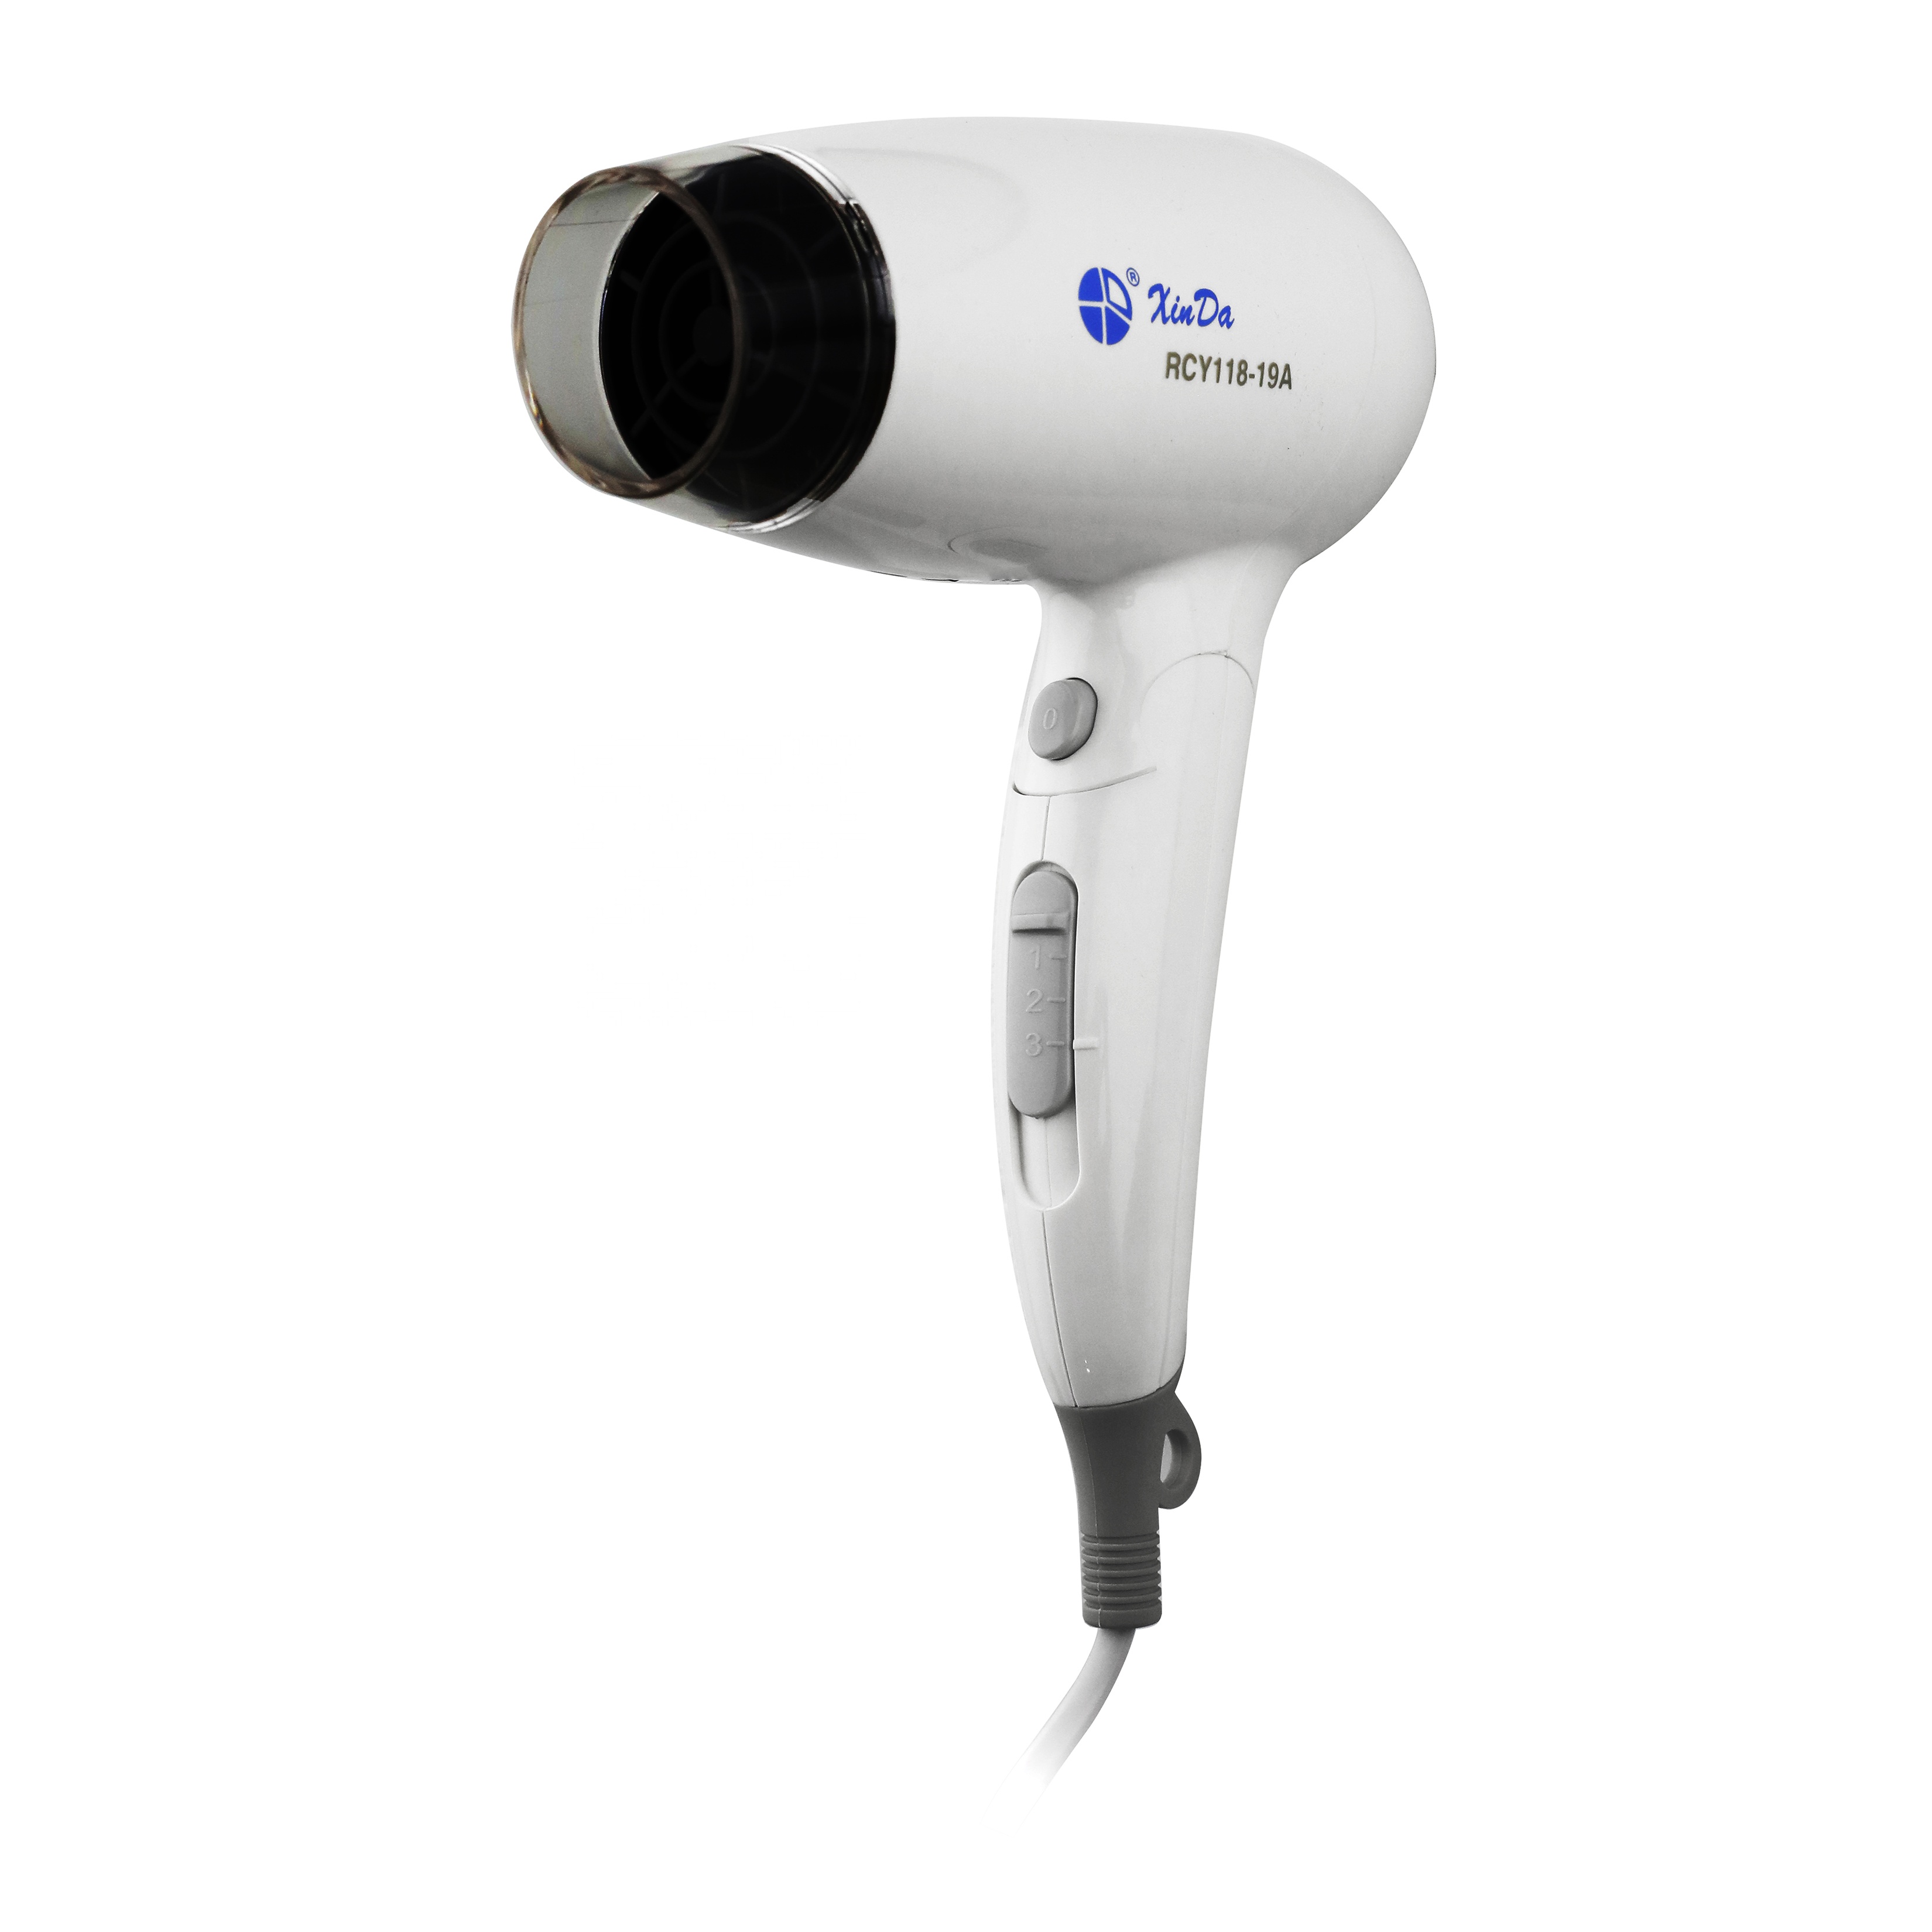 The XINDA RCY-118 19A Personal & Family Travel Convenience Foldable ABS White Hair Dryer